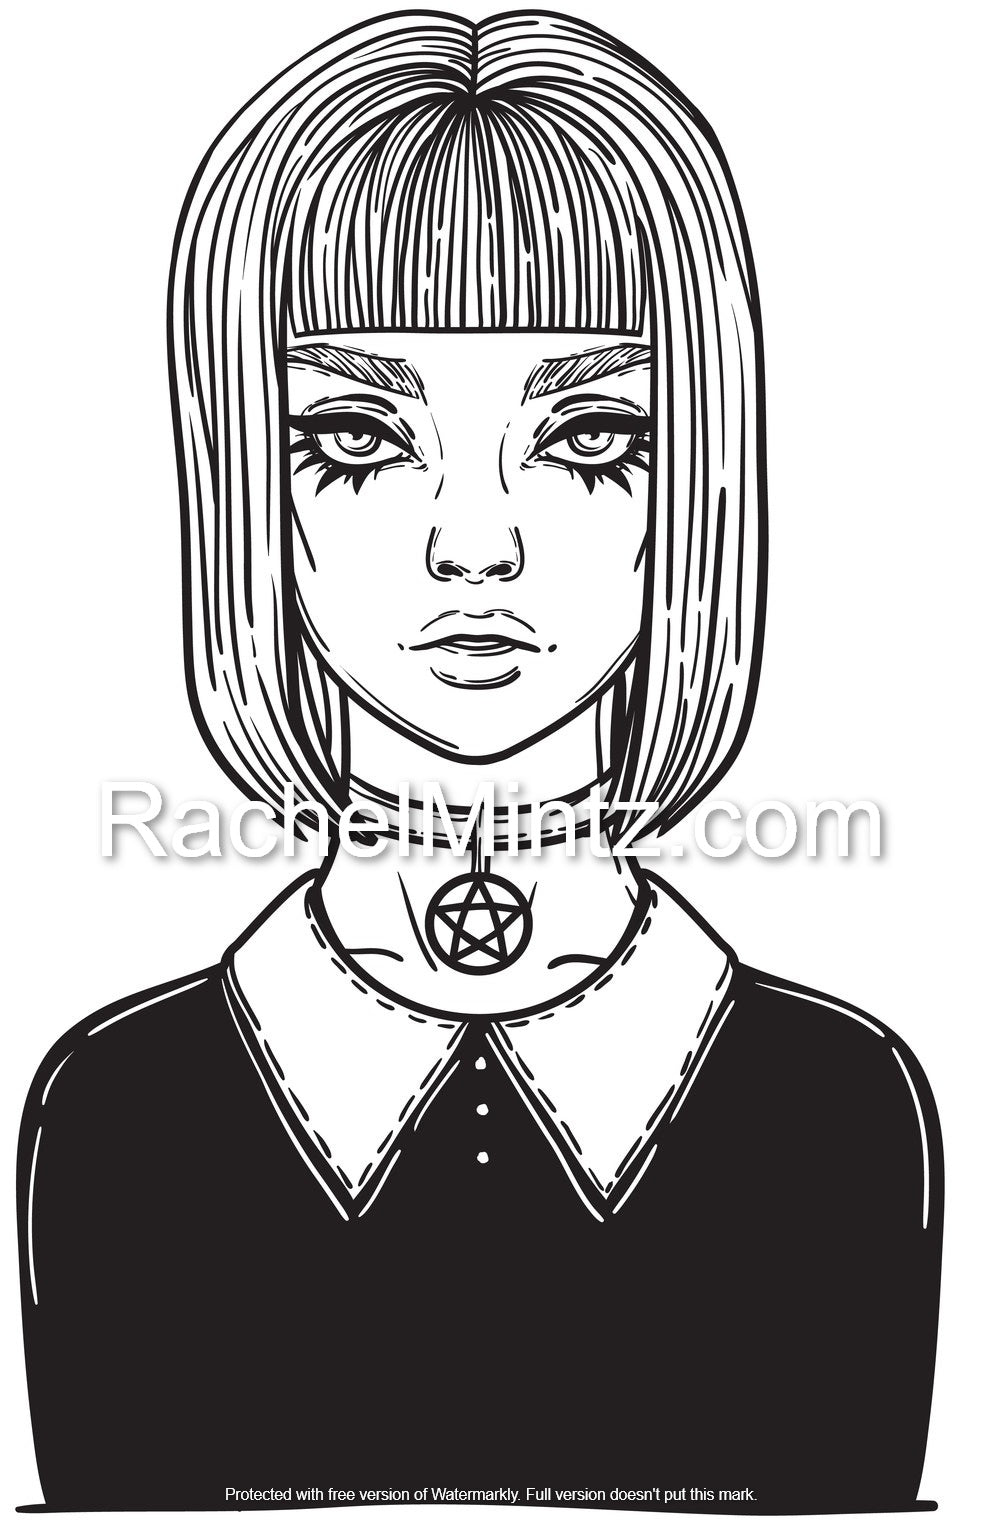 Fascinating Portraits - Beautiful Mysterious, Occult, Surreal Women in Various Art Styles - Printable Format Book